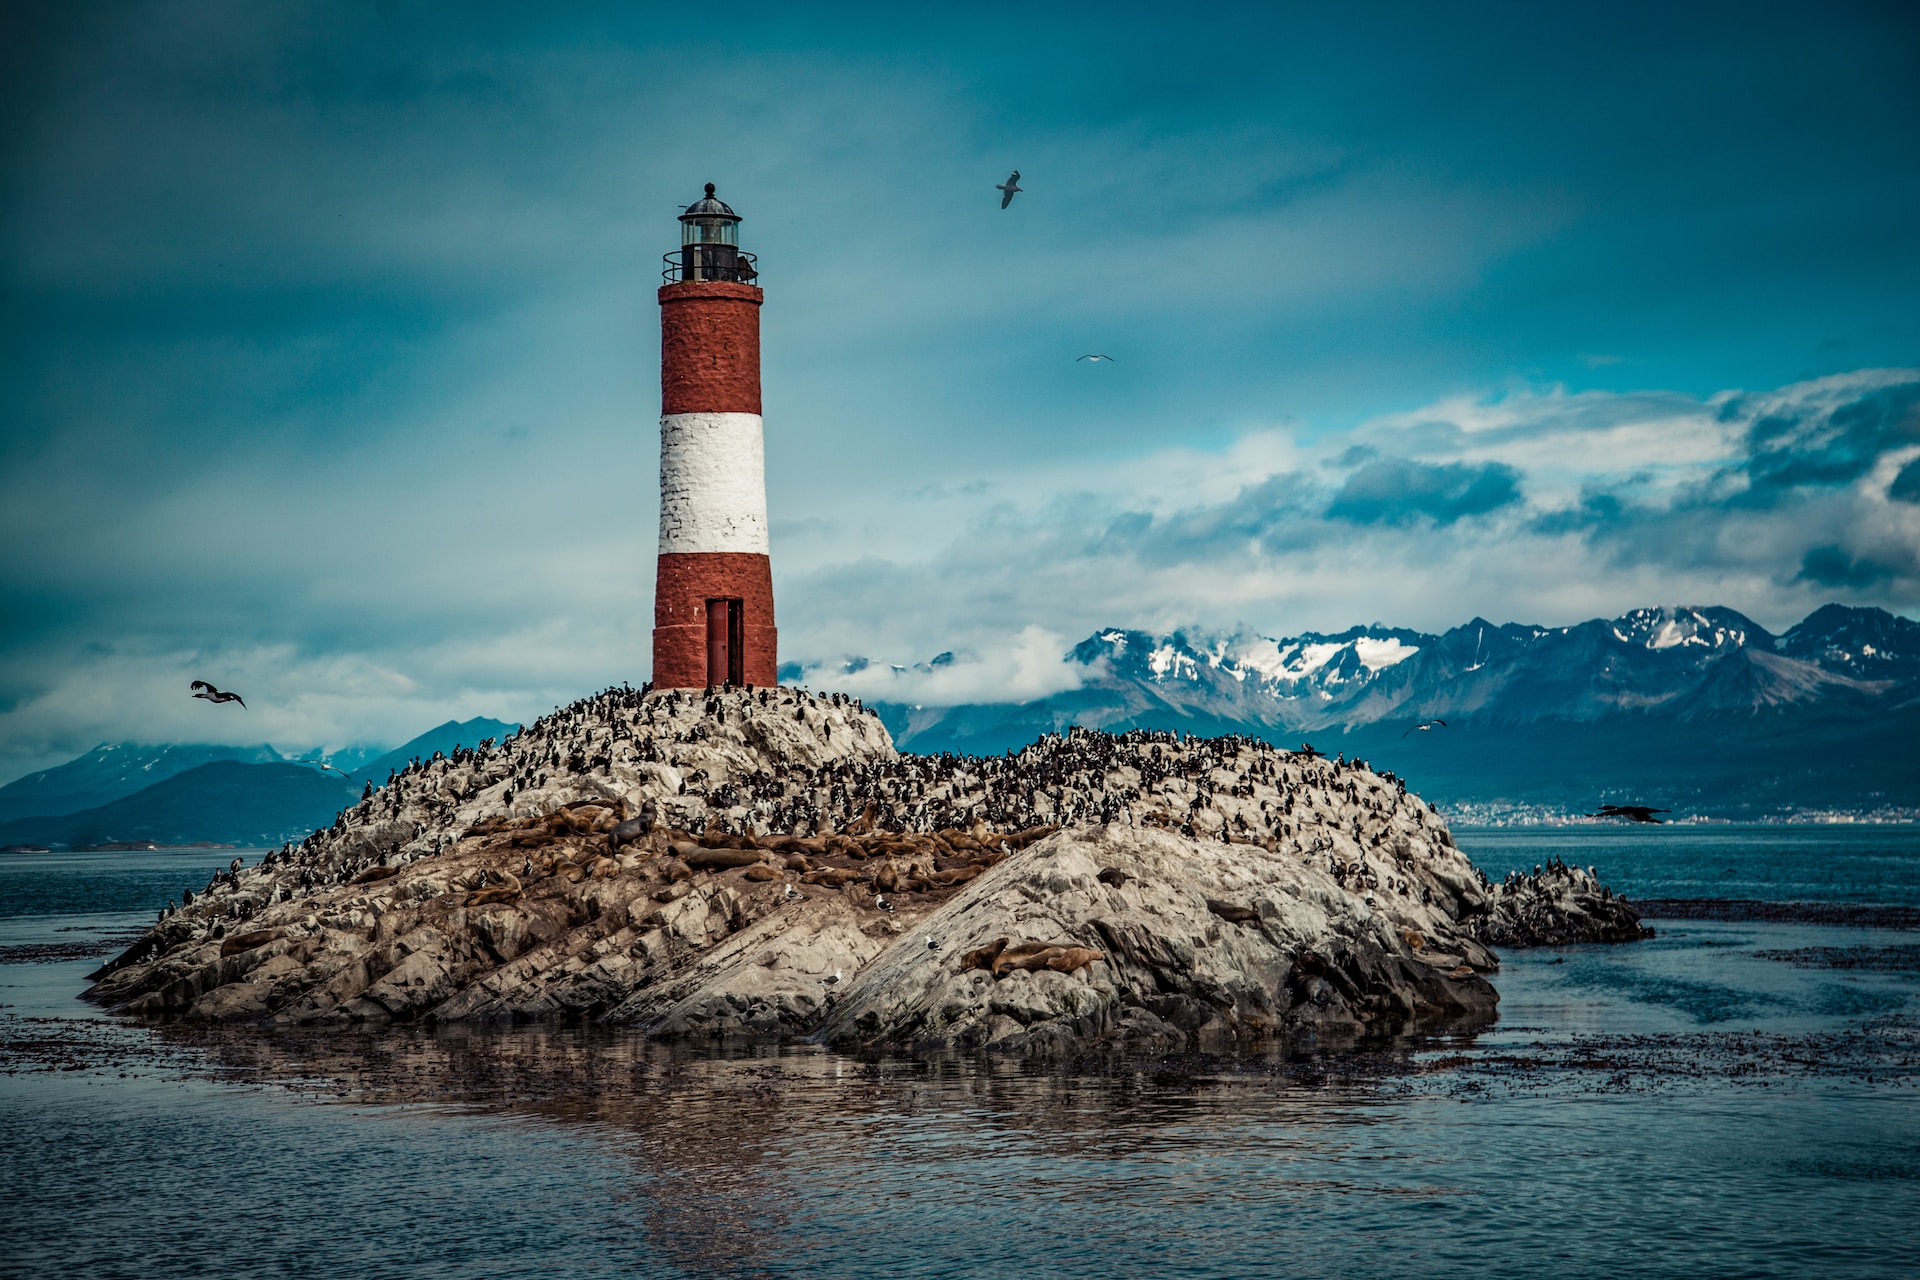 red and white lighthouse on a rock surrounded by sea birds